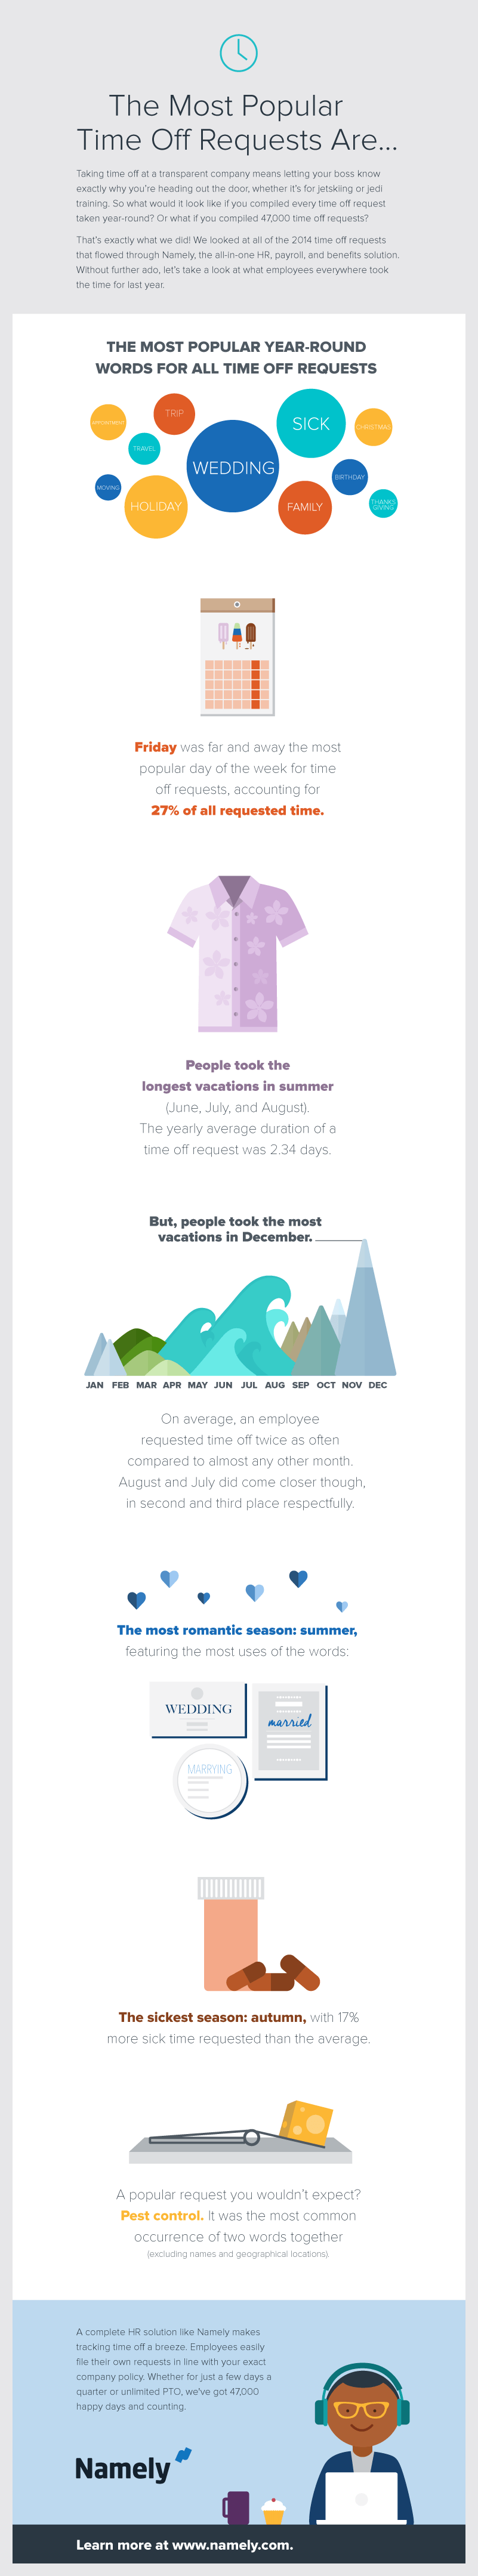 namely: employee time off infographic